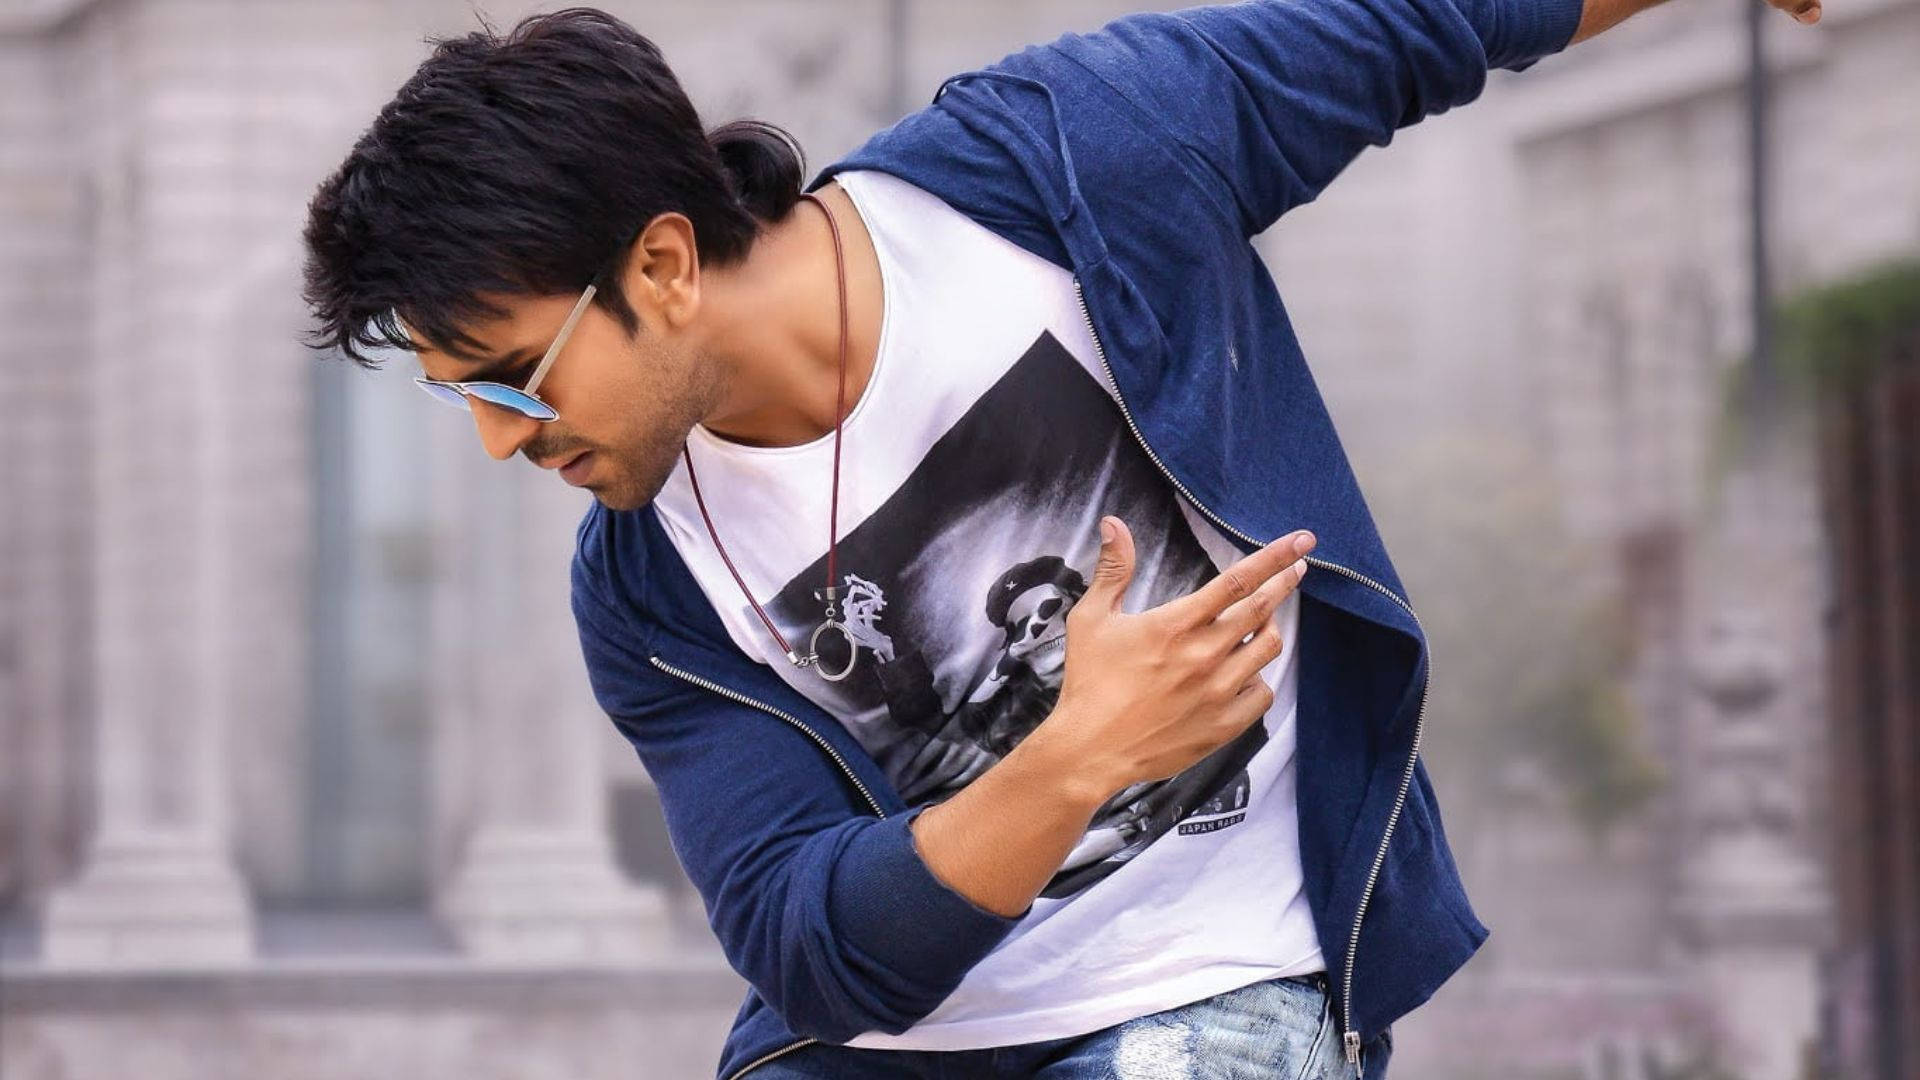 Dynamic Ram Charan In Full Swing - A Candid Shot From A Street Dance Scene. Background